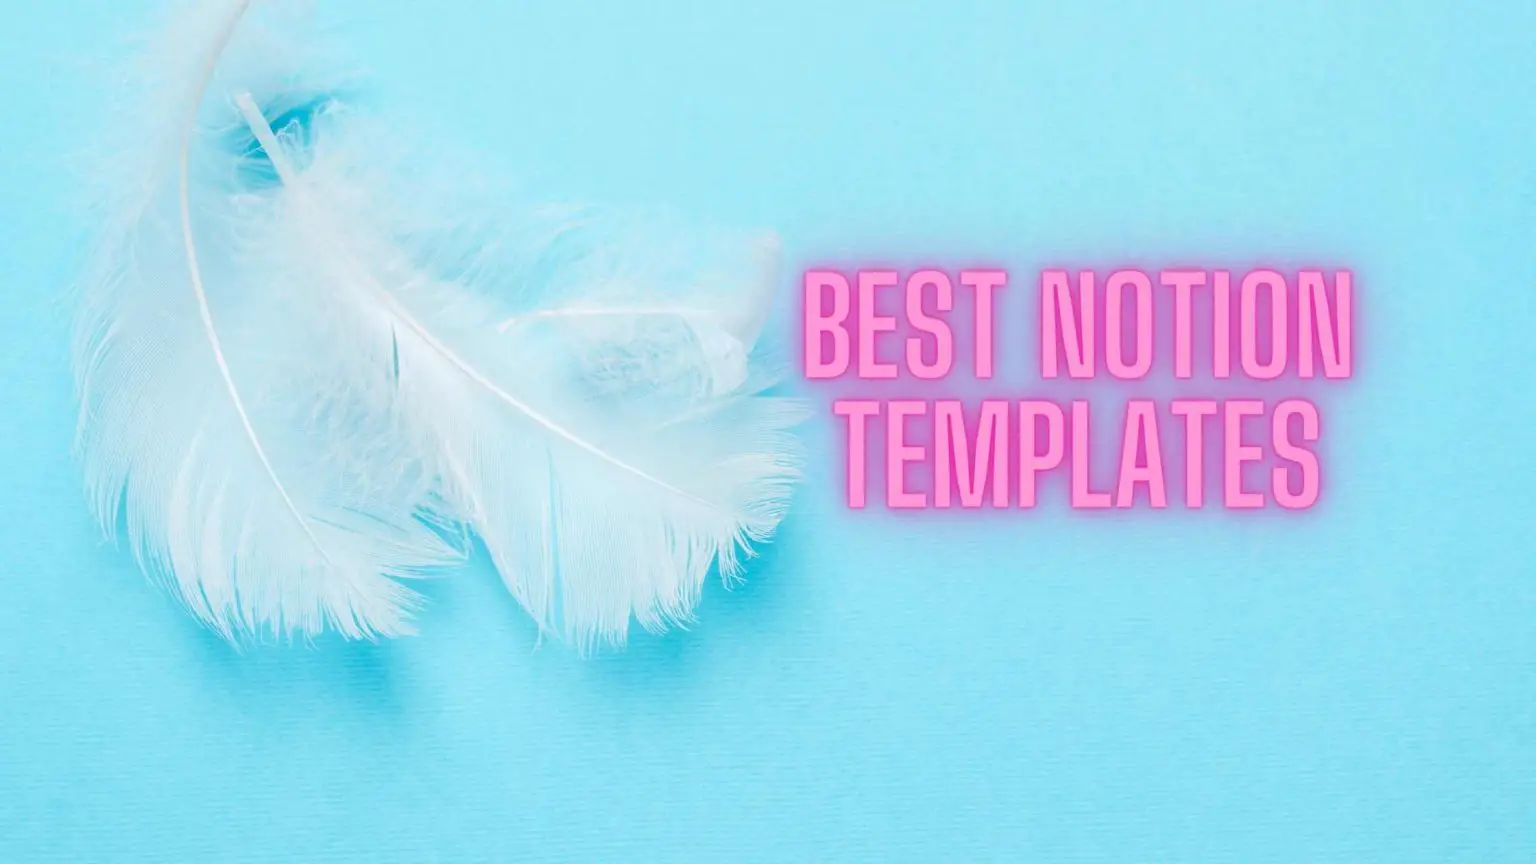 19 Of The Best Notion Templates For Your Personal Use 